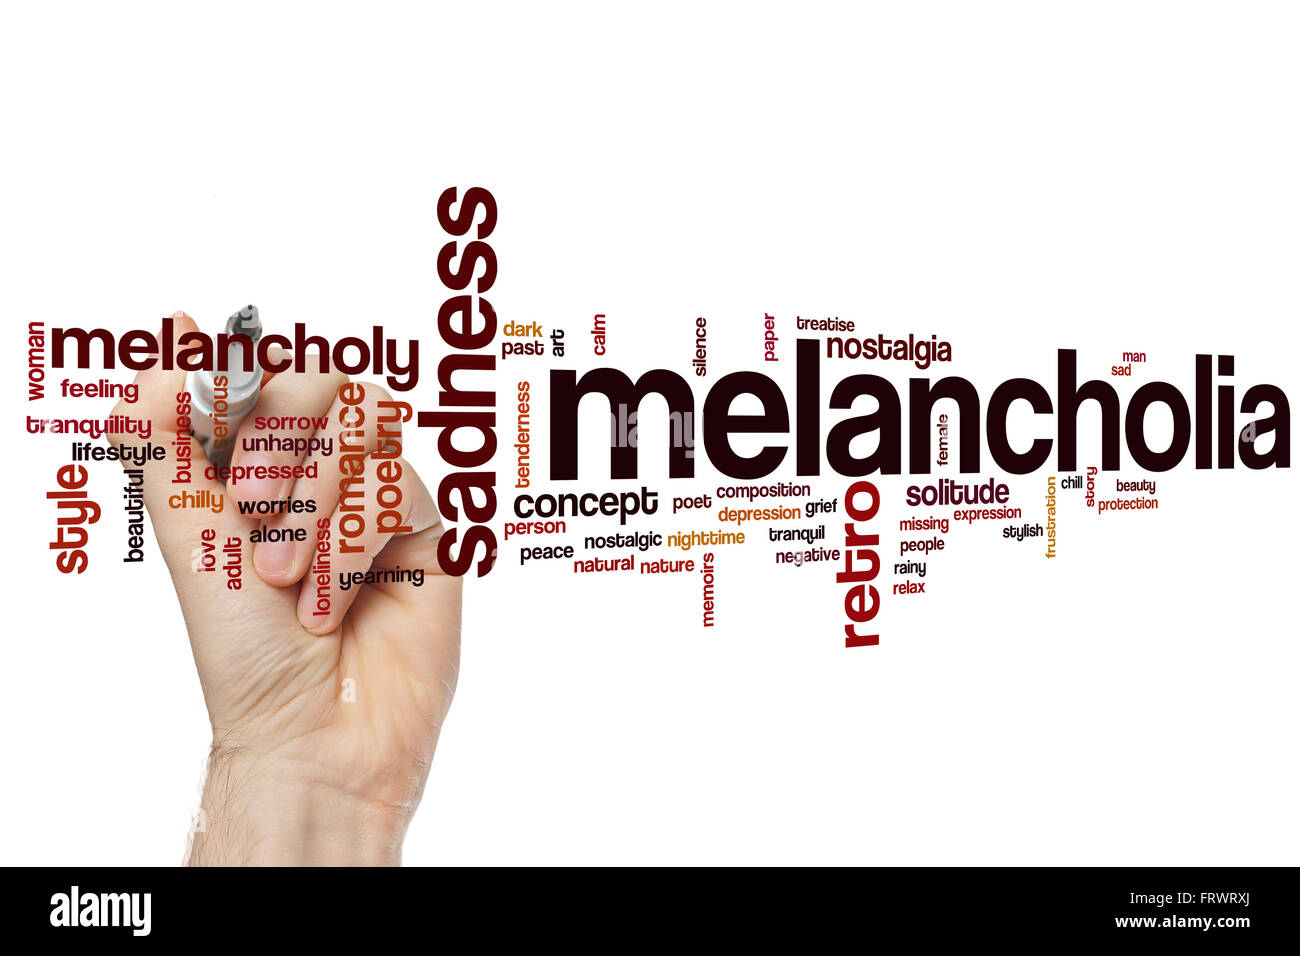 Melancholia word cloud concept with sad poet related tags Stock Photo